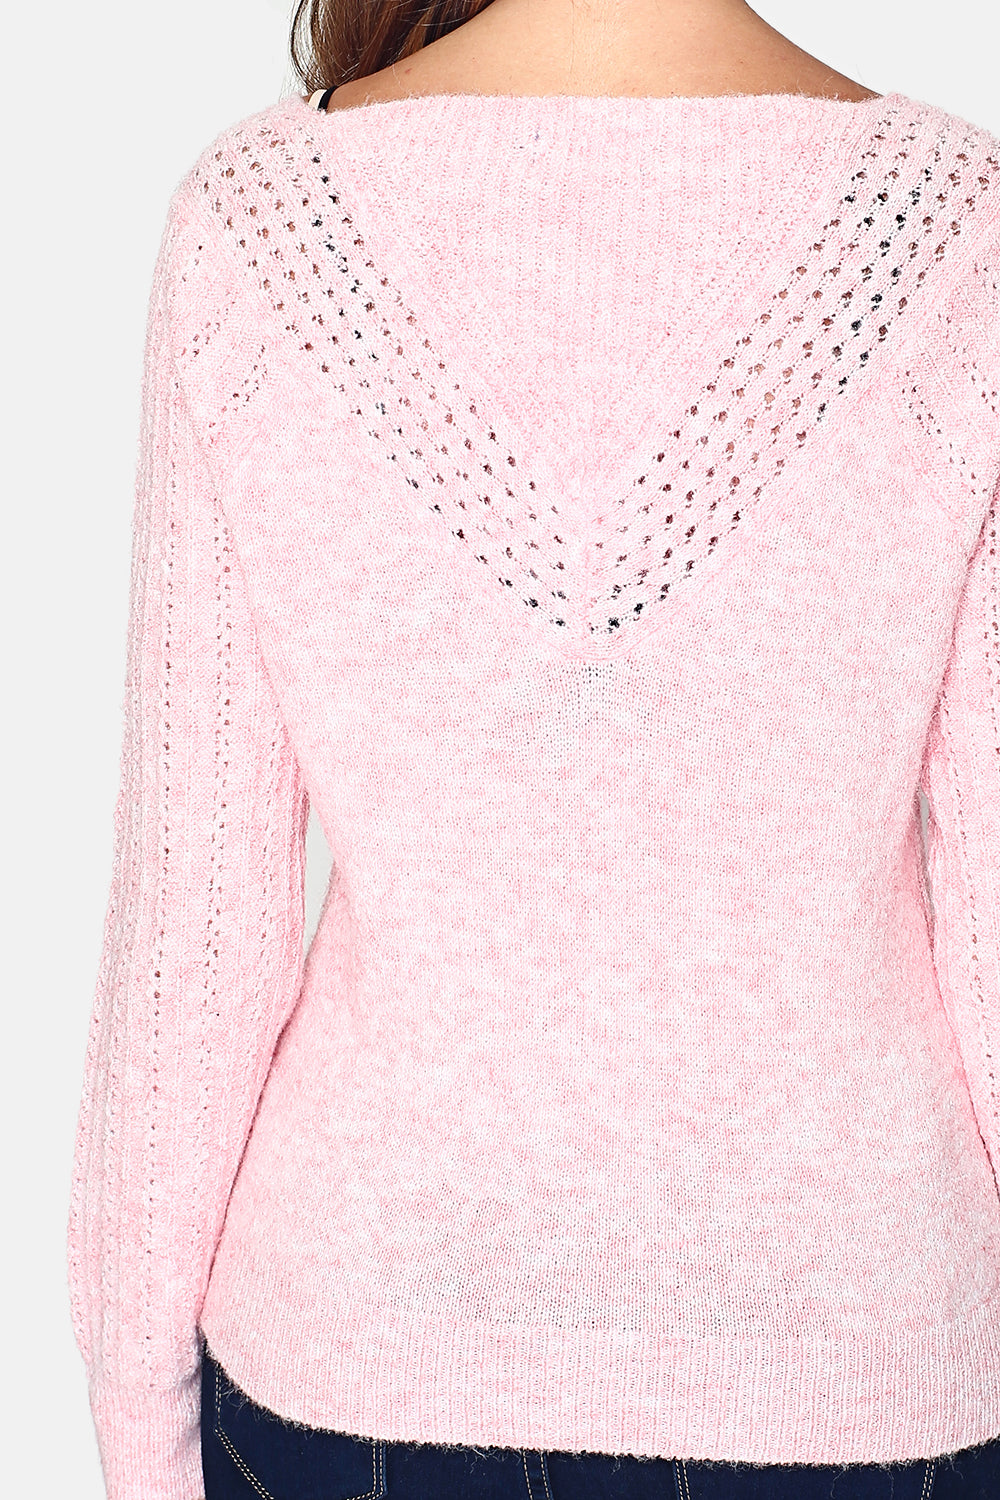 Sweater to wear with a V neckline in the front or back, long slightly puff sleeves in a fancy knit